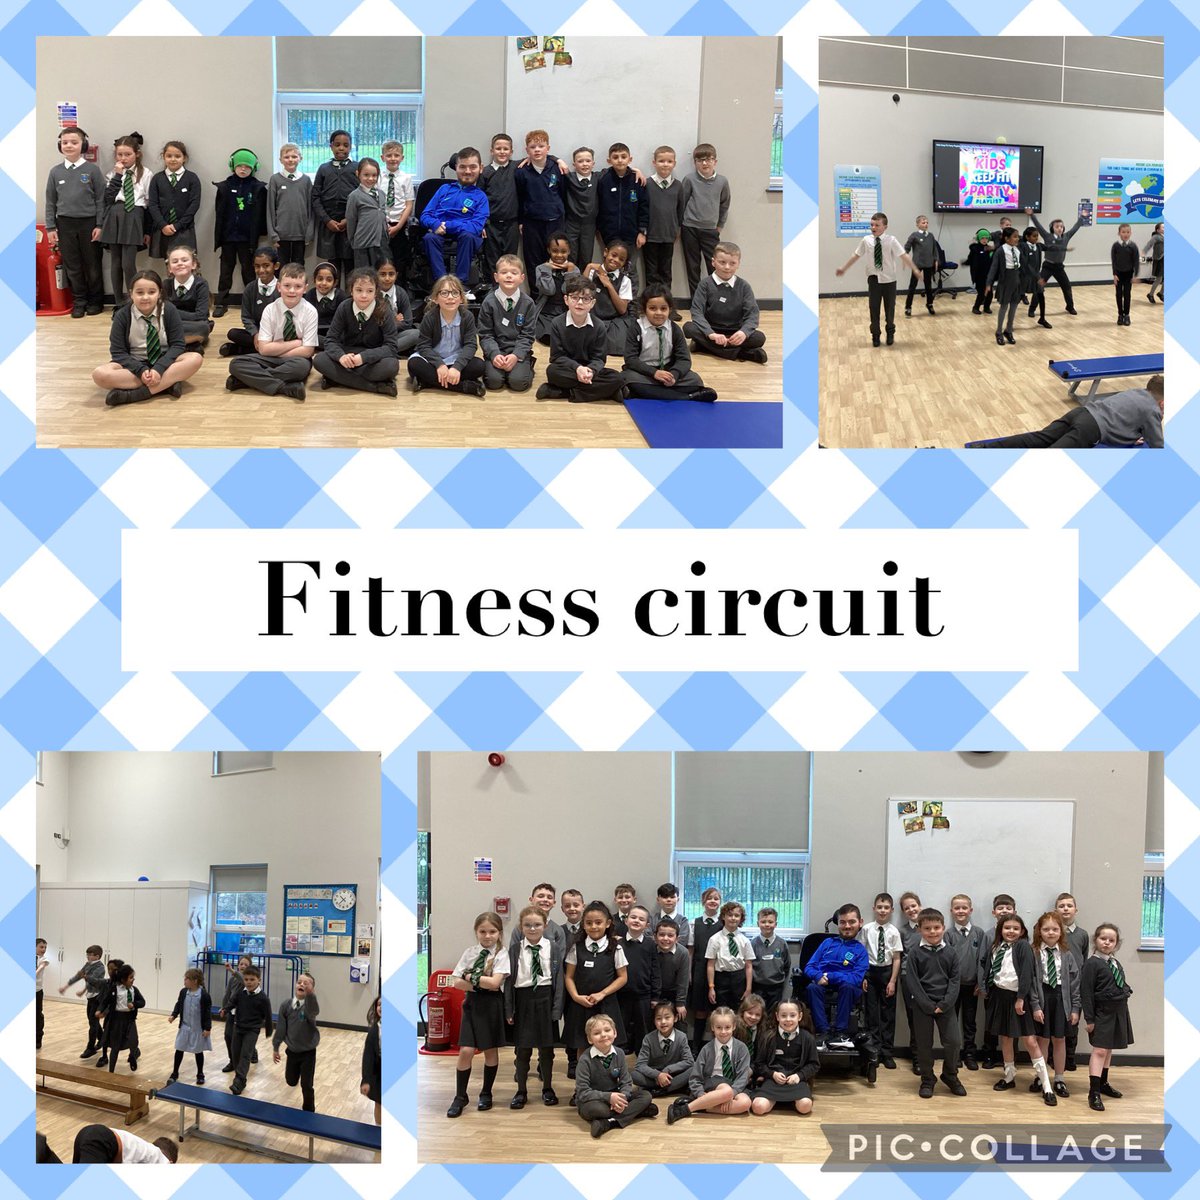 This morning Year 3 enjoyed taking part in a fitness circuit with athlete Brad Bates. #everychildanathlete